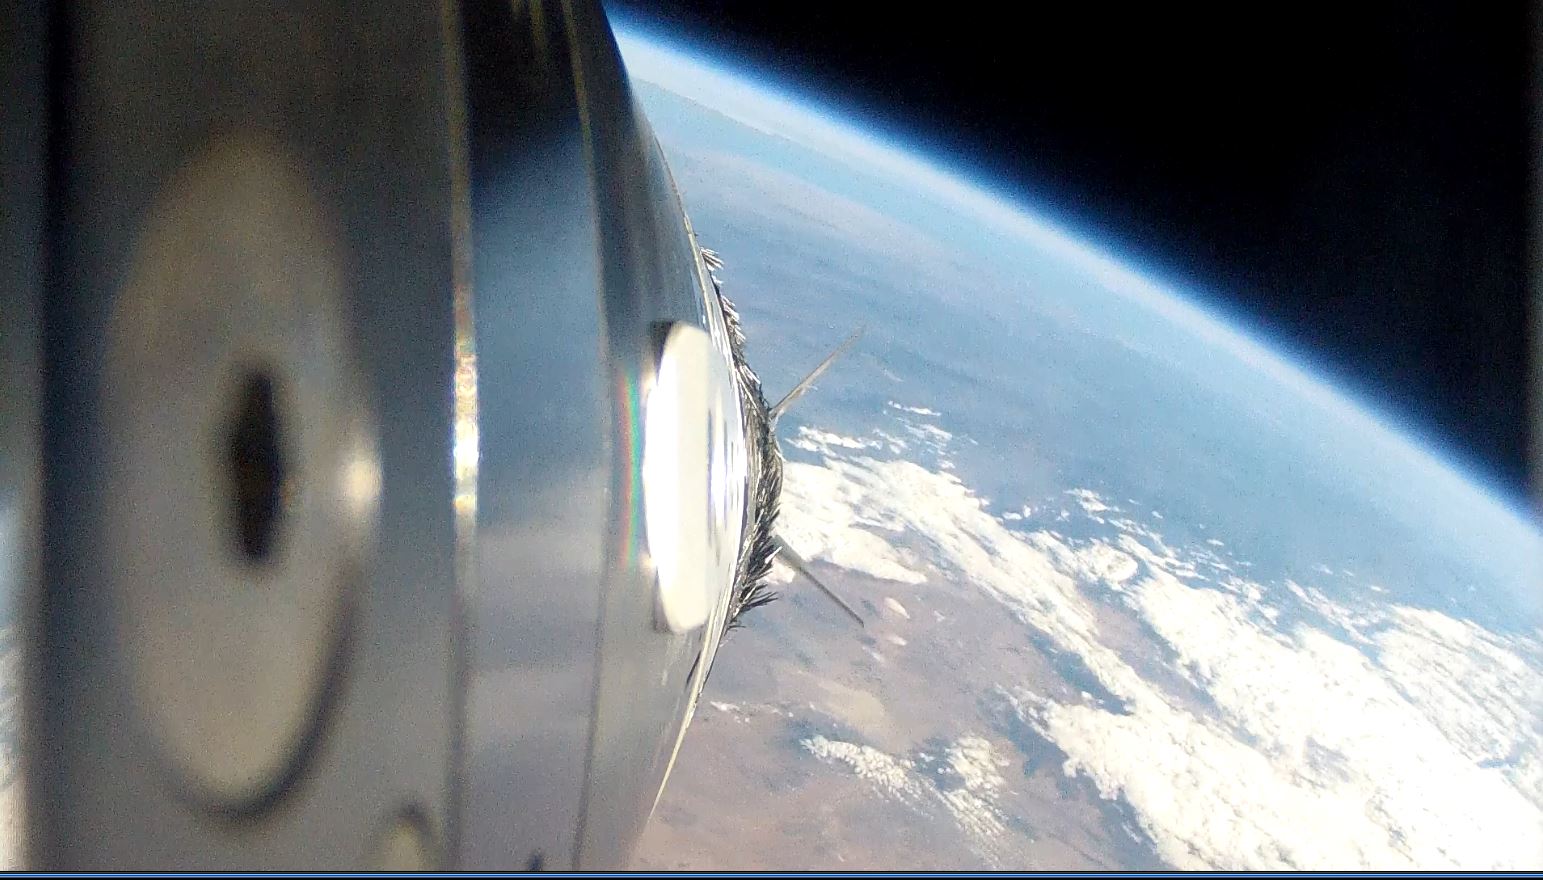 An along-the-side view of a sounding rocket in space above Earth